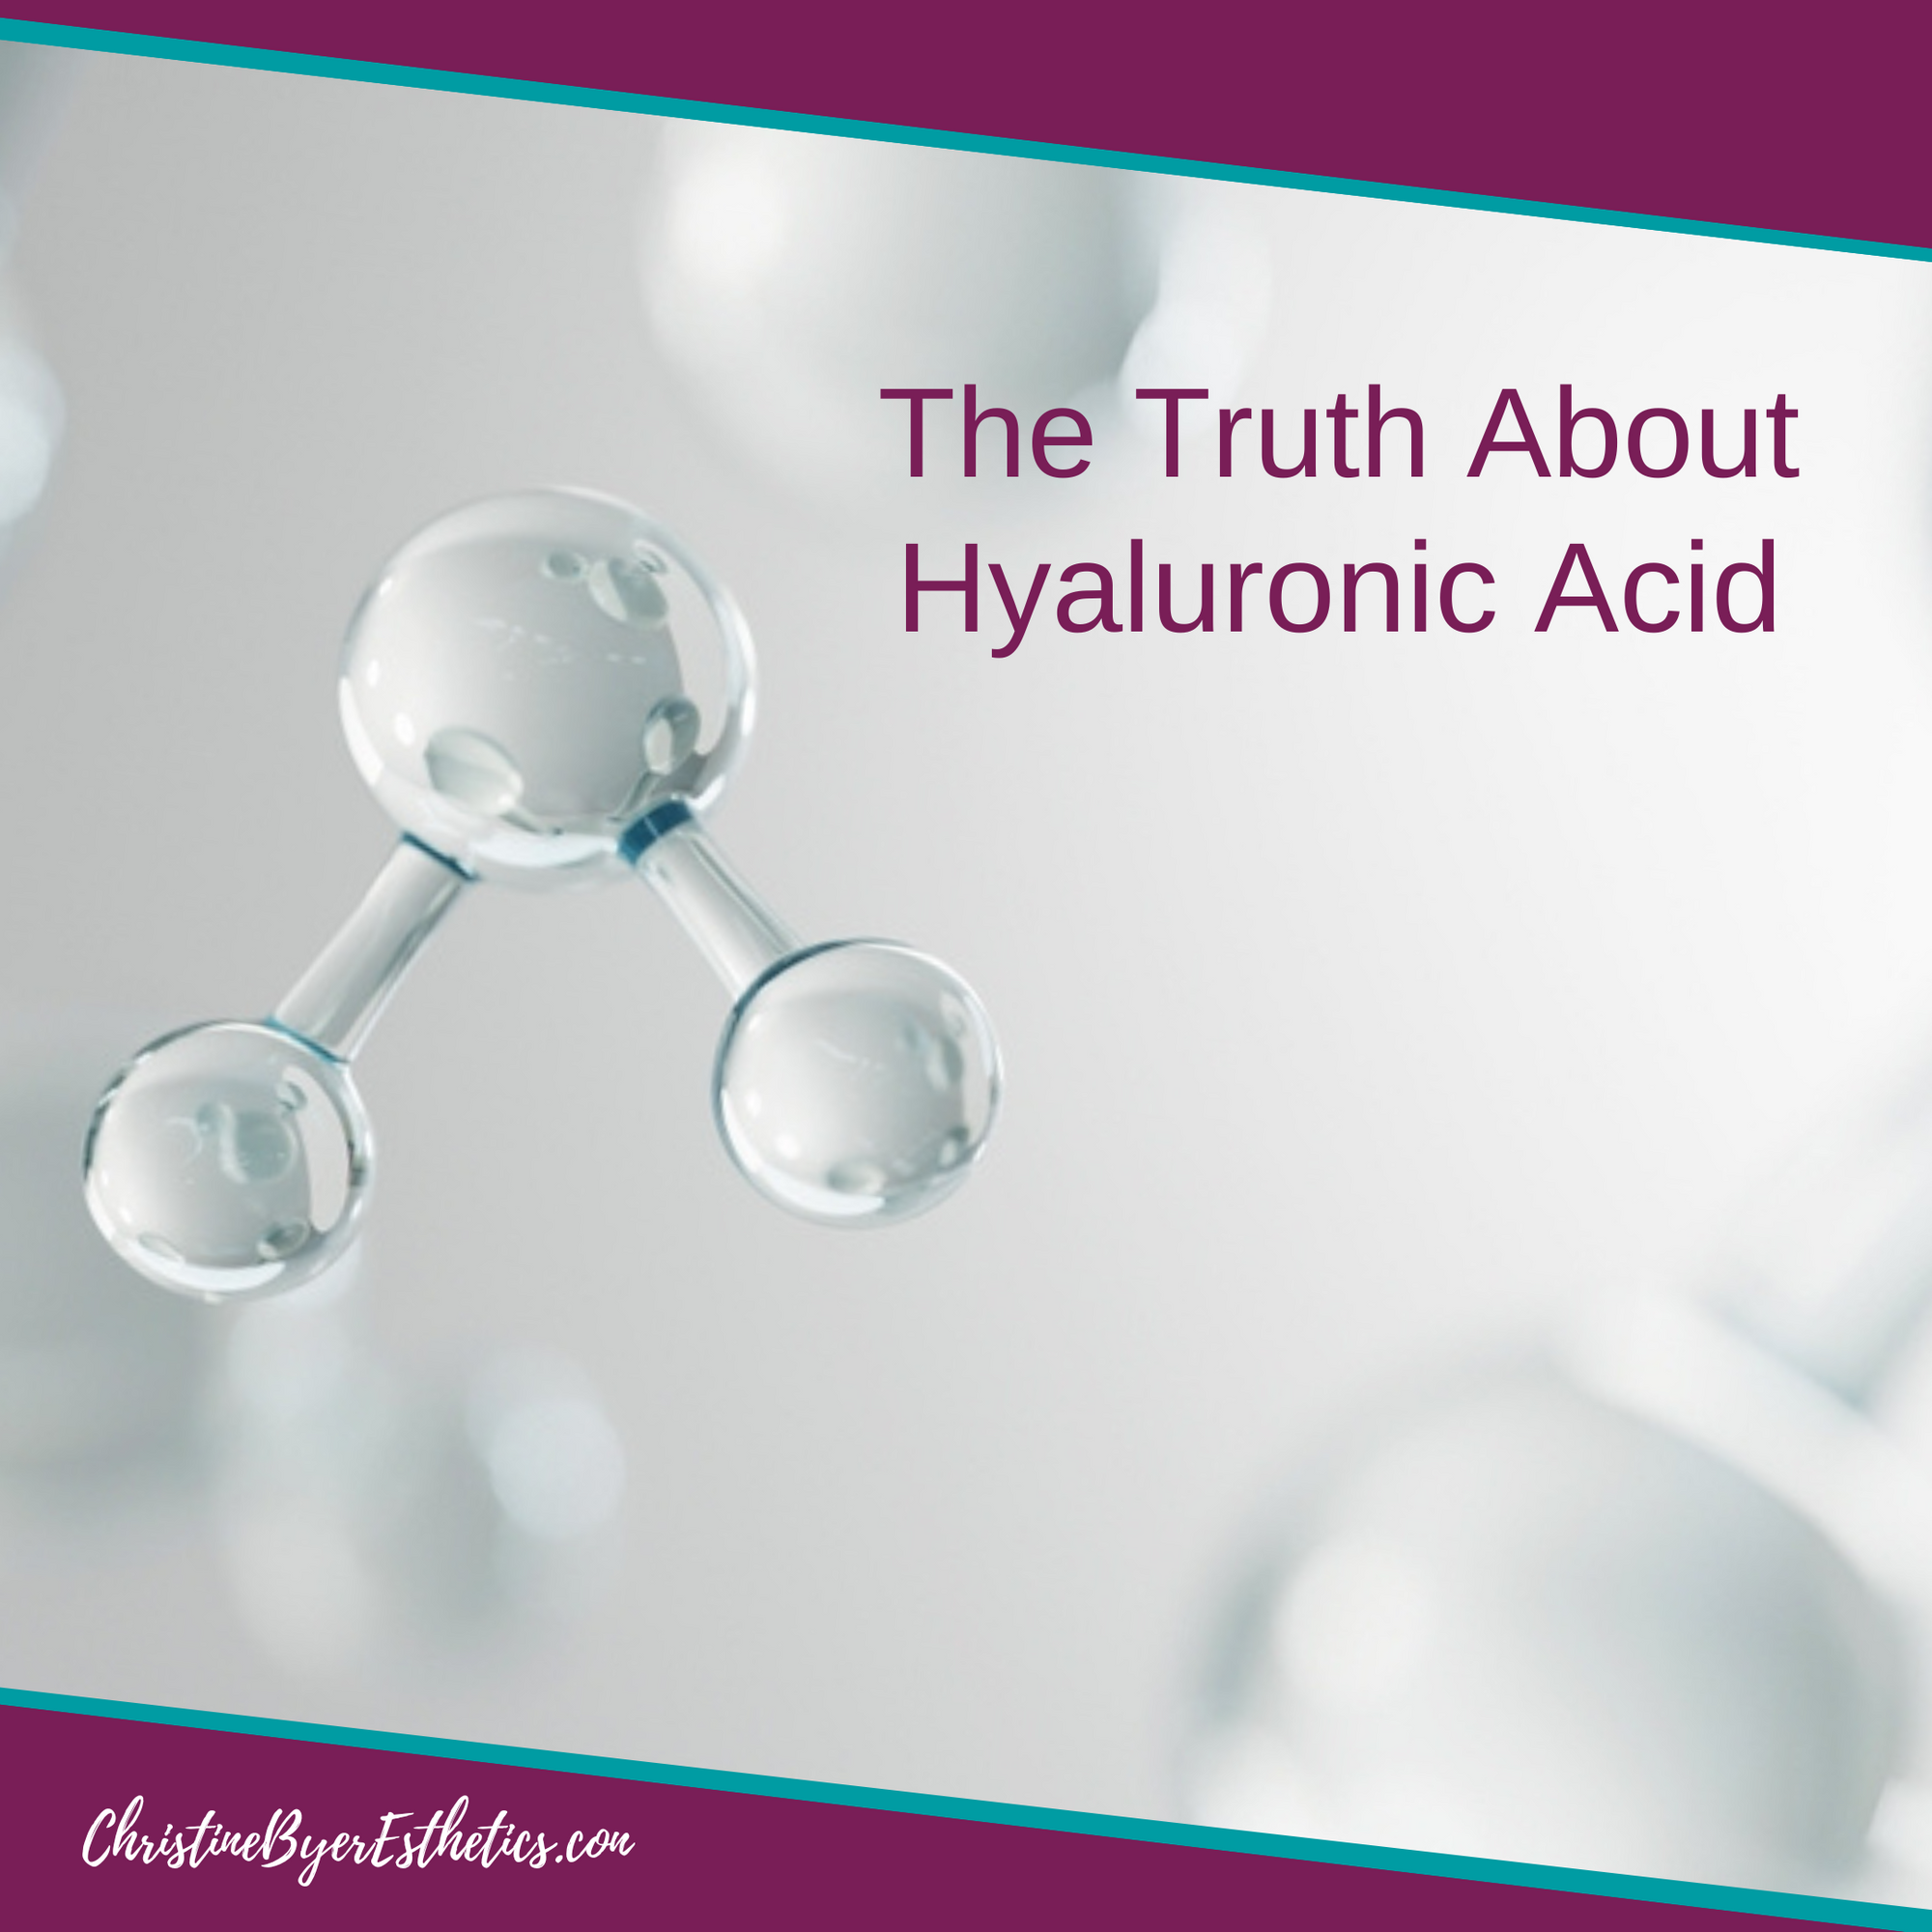 The Truth About Hyaluronic Acid